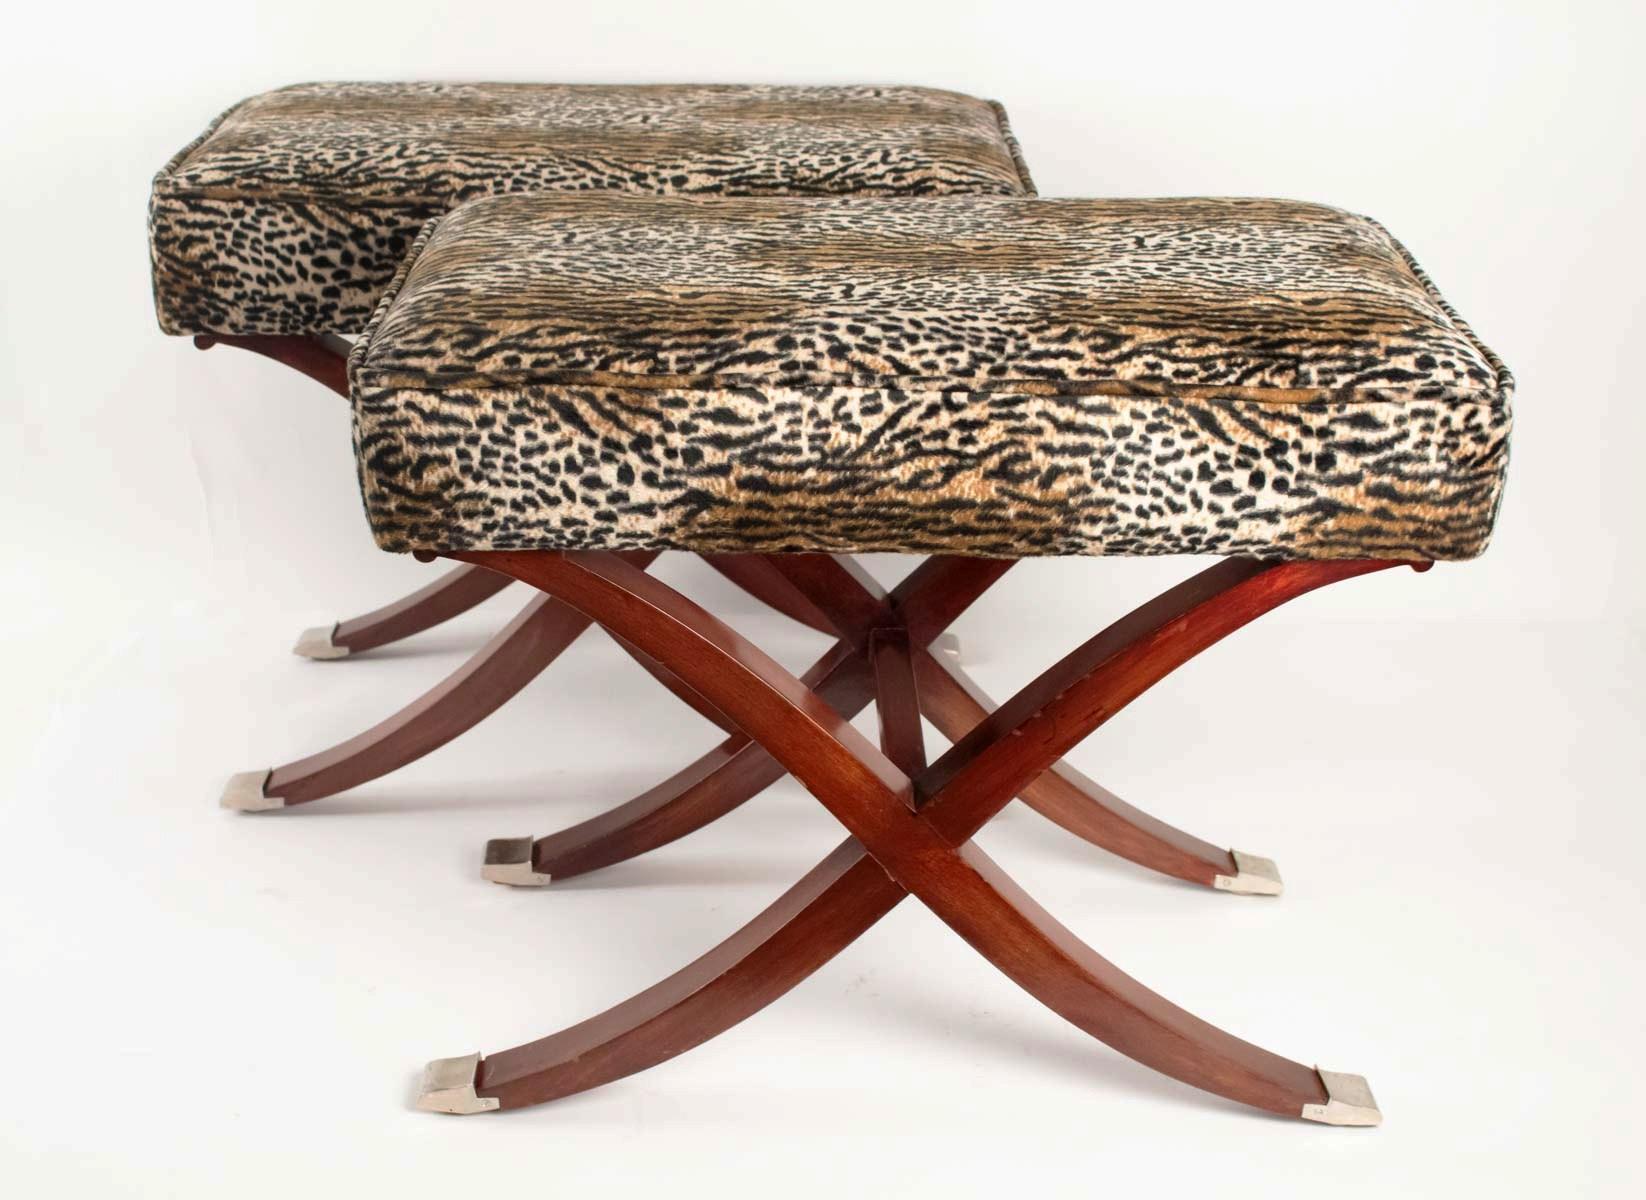 Spectacular pair of Art Deco style X-shaped stools, France, late 20th century
with fake leopard upholstery.